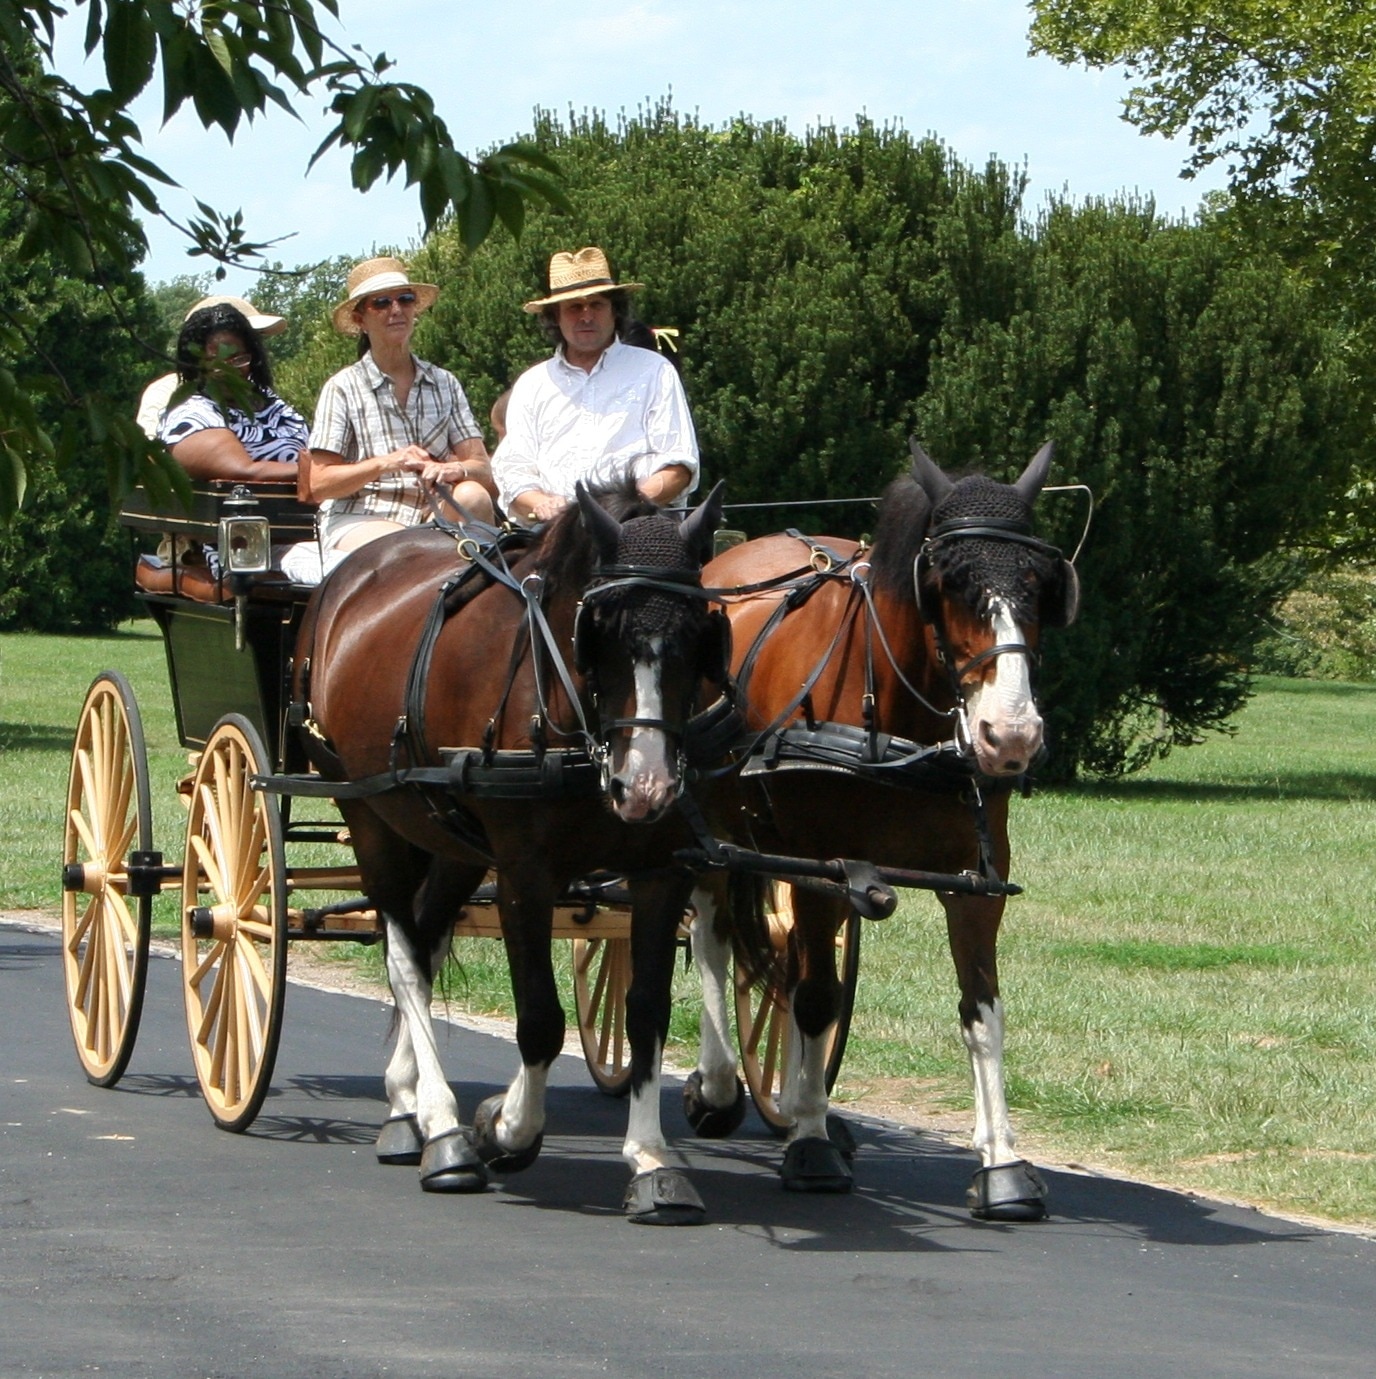 4 people riding on horse carriage photo